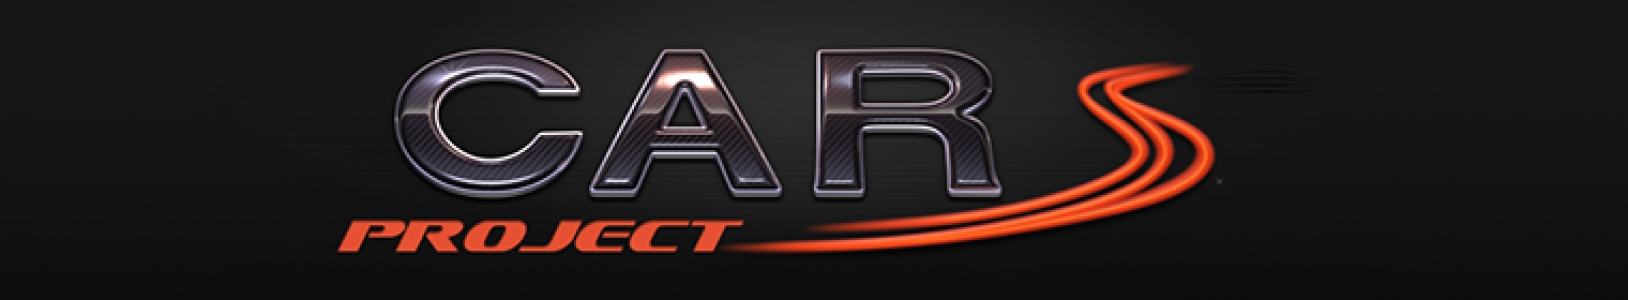 Project CARS banner